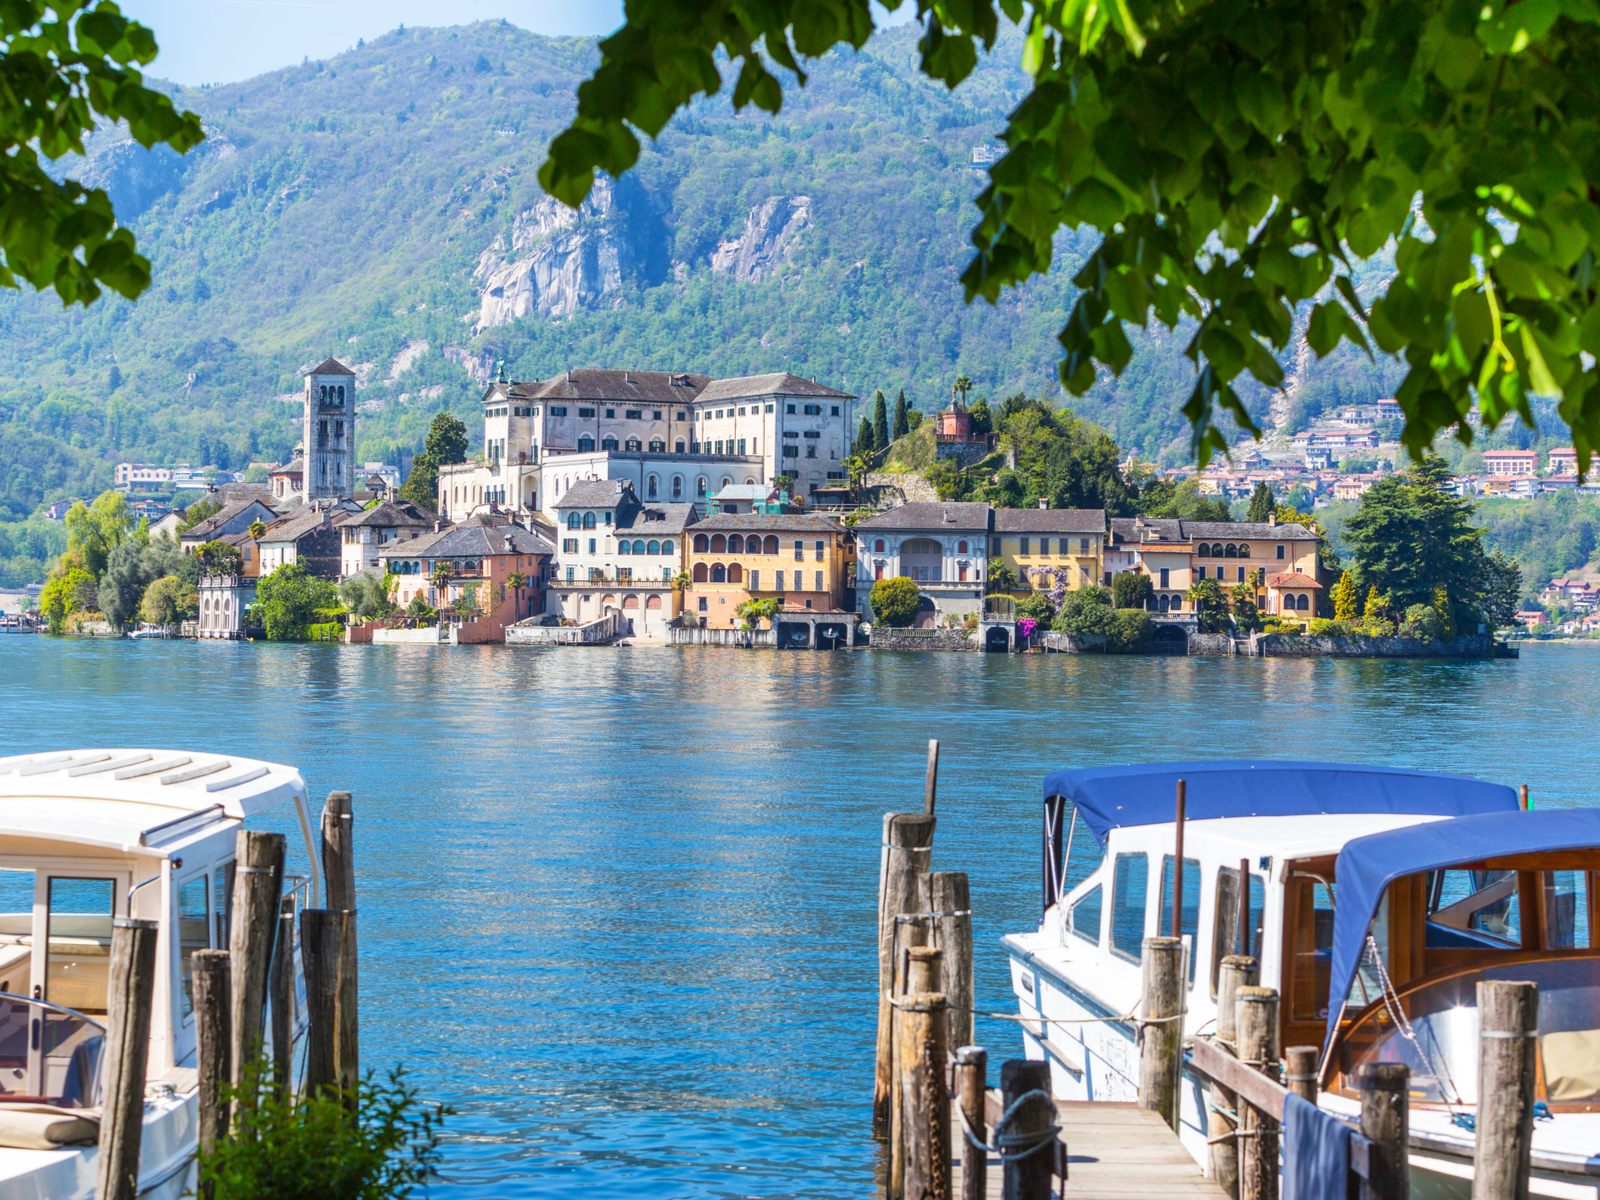 For a piece on the best places to visit in Italy, a dock overlooking San Giulio Island on Laek Orta